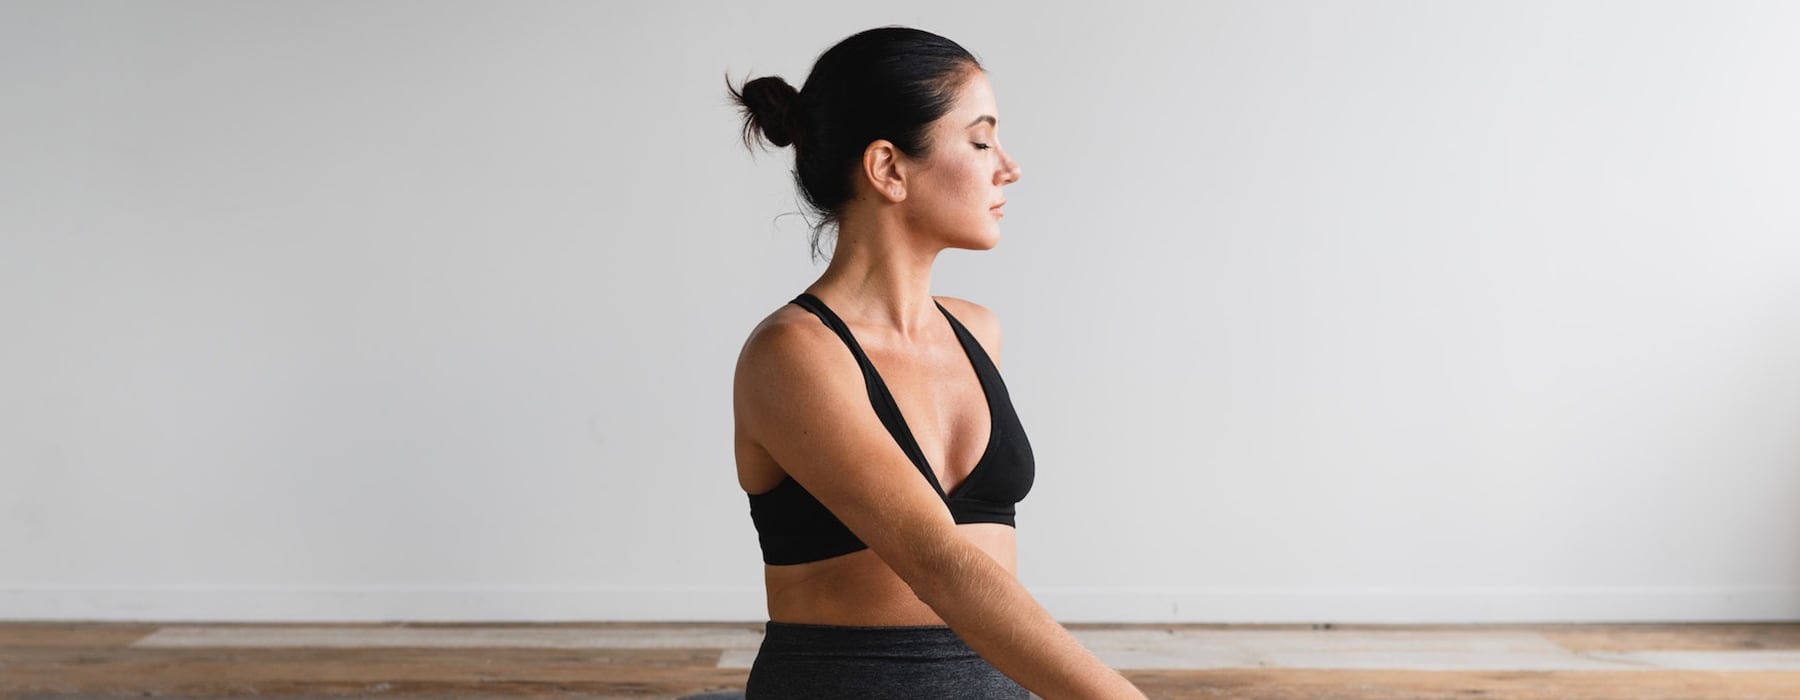 lifestyle image of a woman in a yoga pose and in a bright space